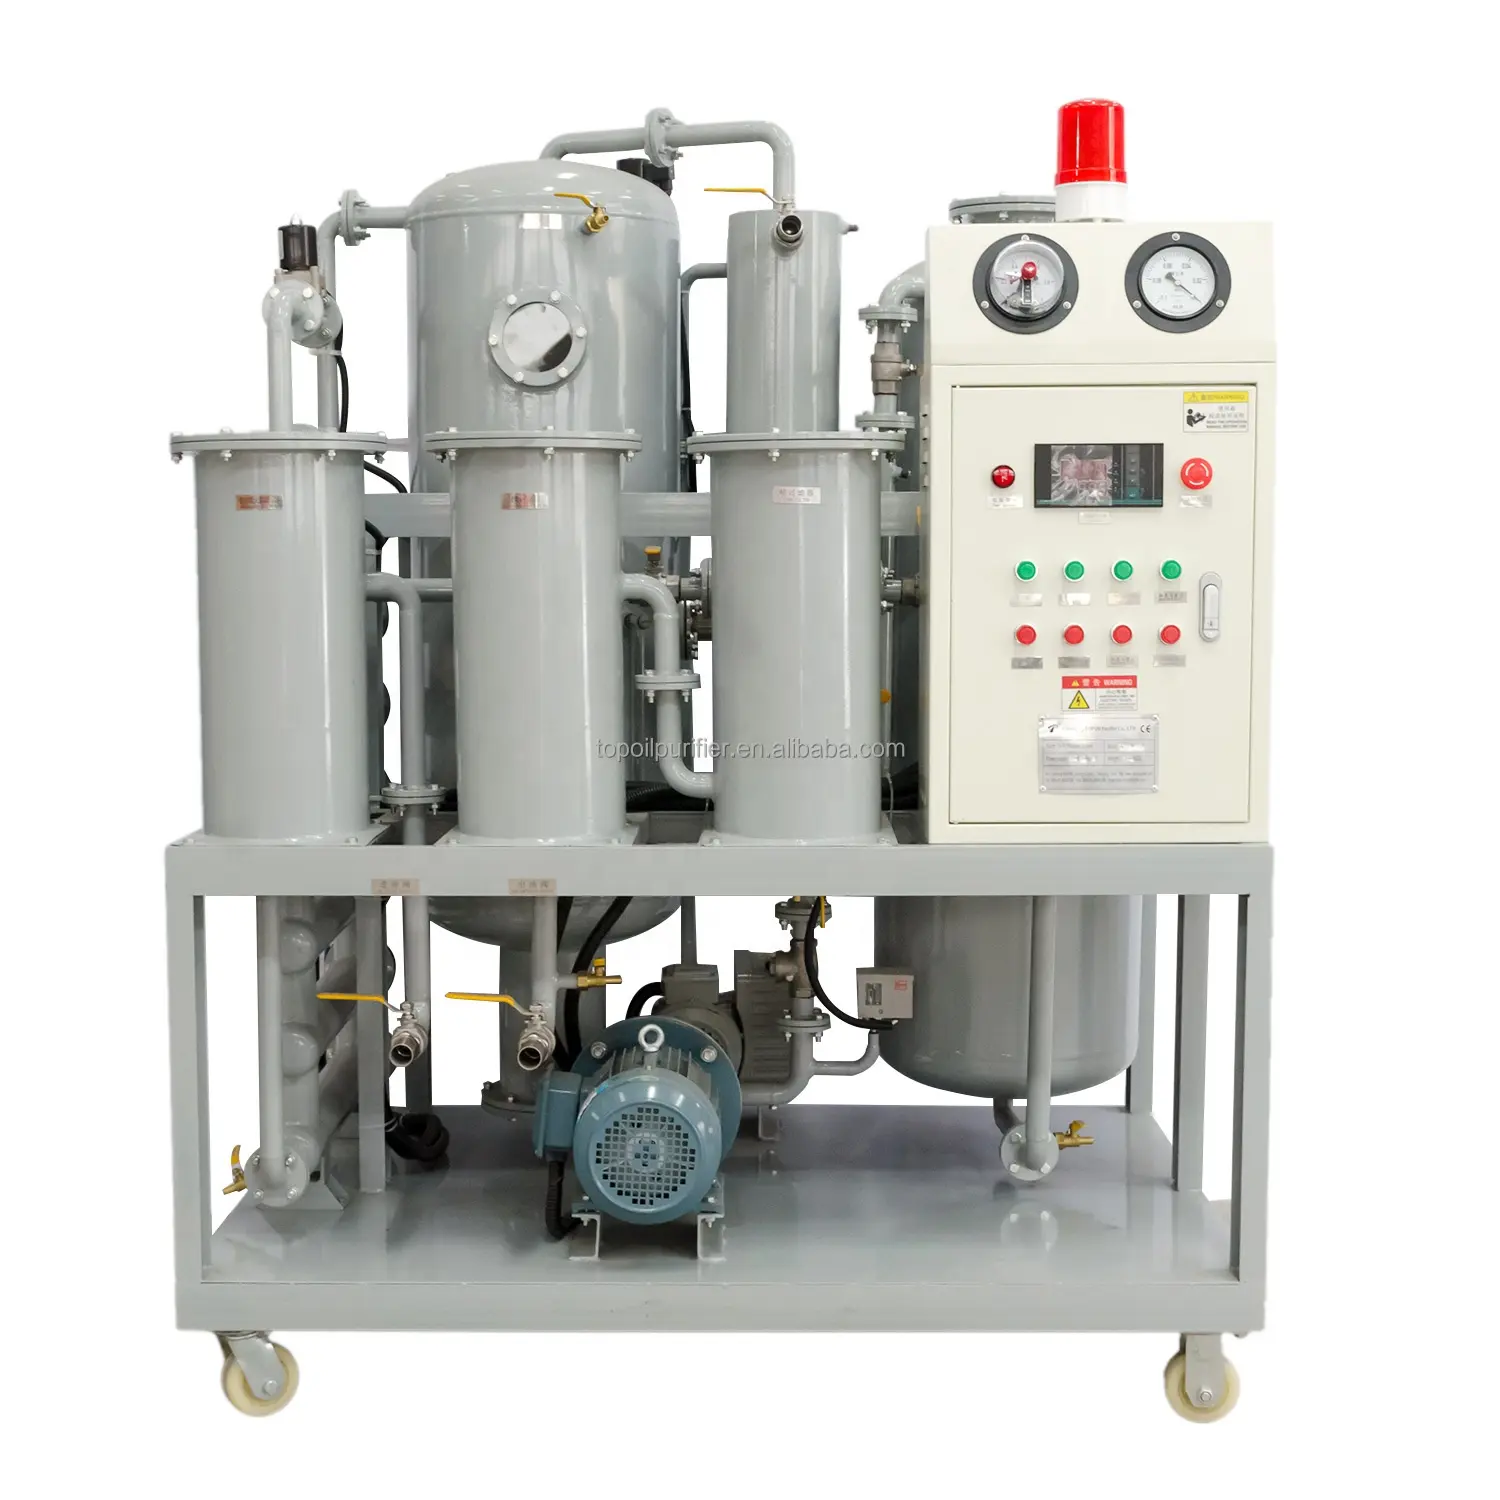 Water Gas Separator Transformer Oil Purification Plant